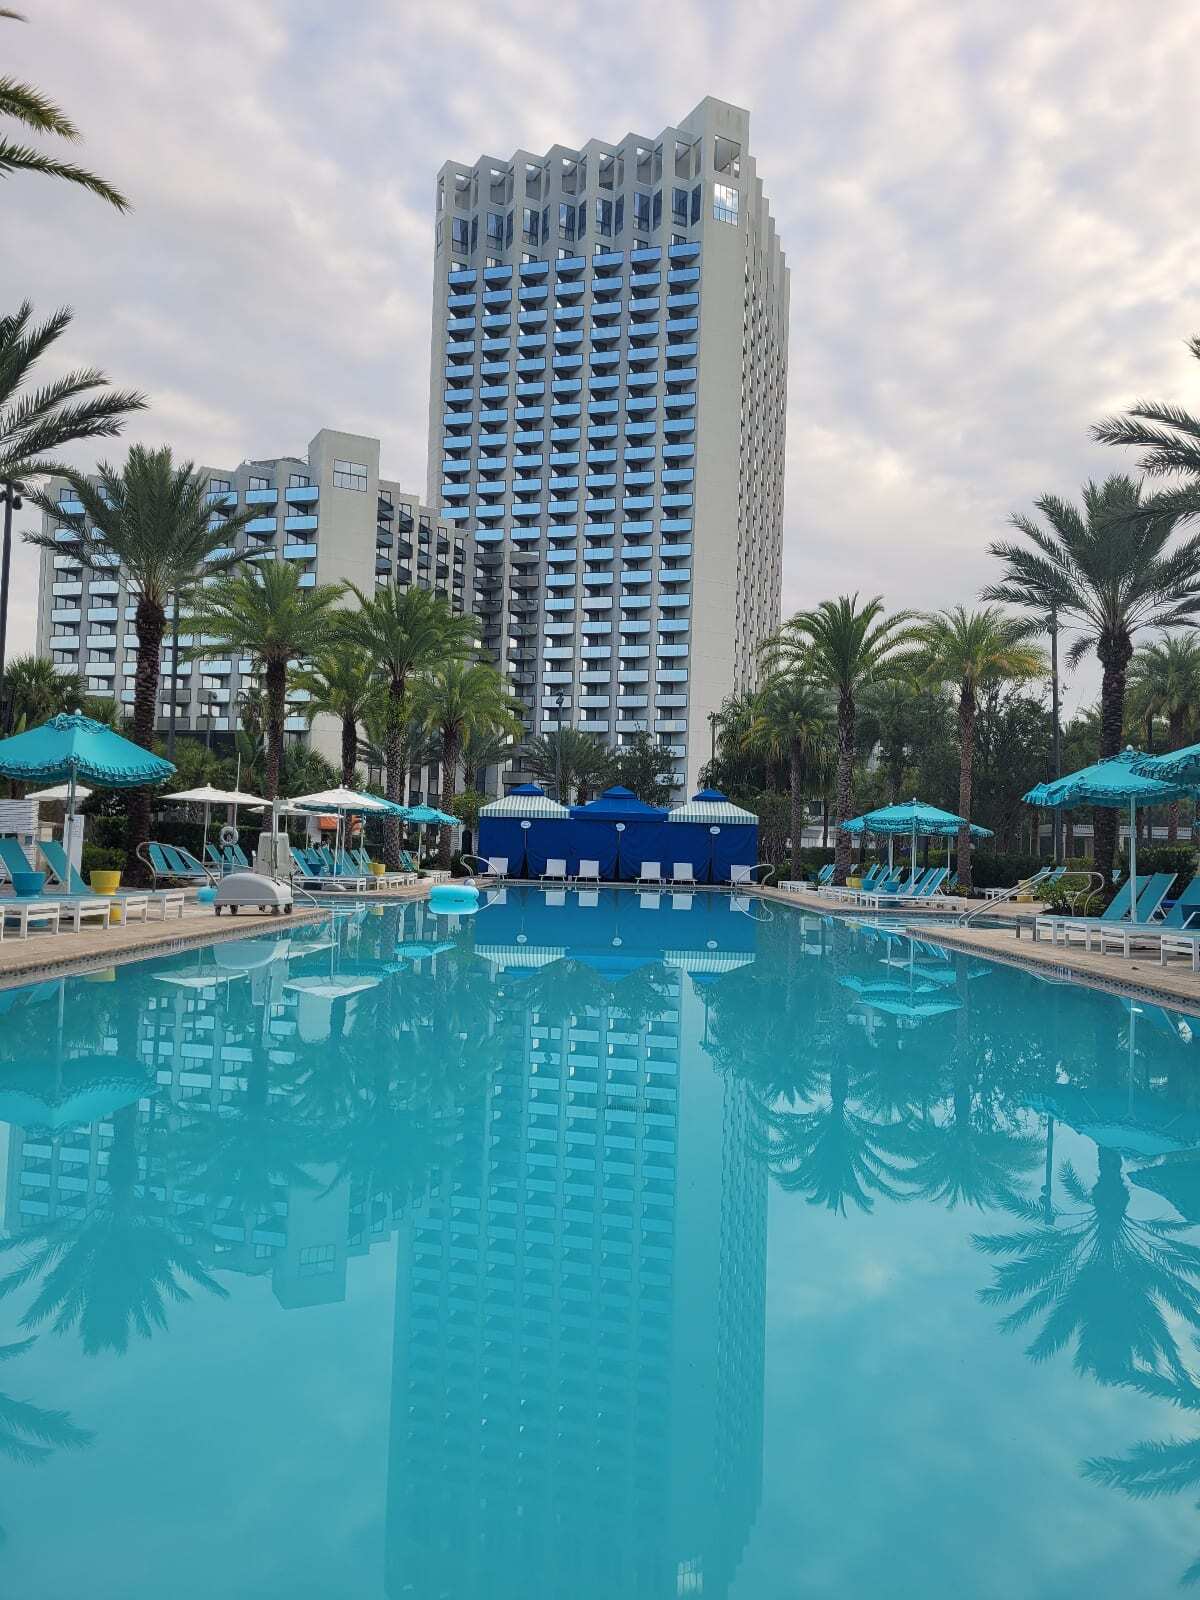 Large Outdoor pool surrounded by lounge chairs, umbrellas, cabanas, and facing a large resort building. Image: Kathy Brown Hilton Buena Vista Palace Resort Walt Disney World.